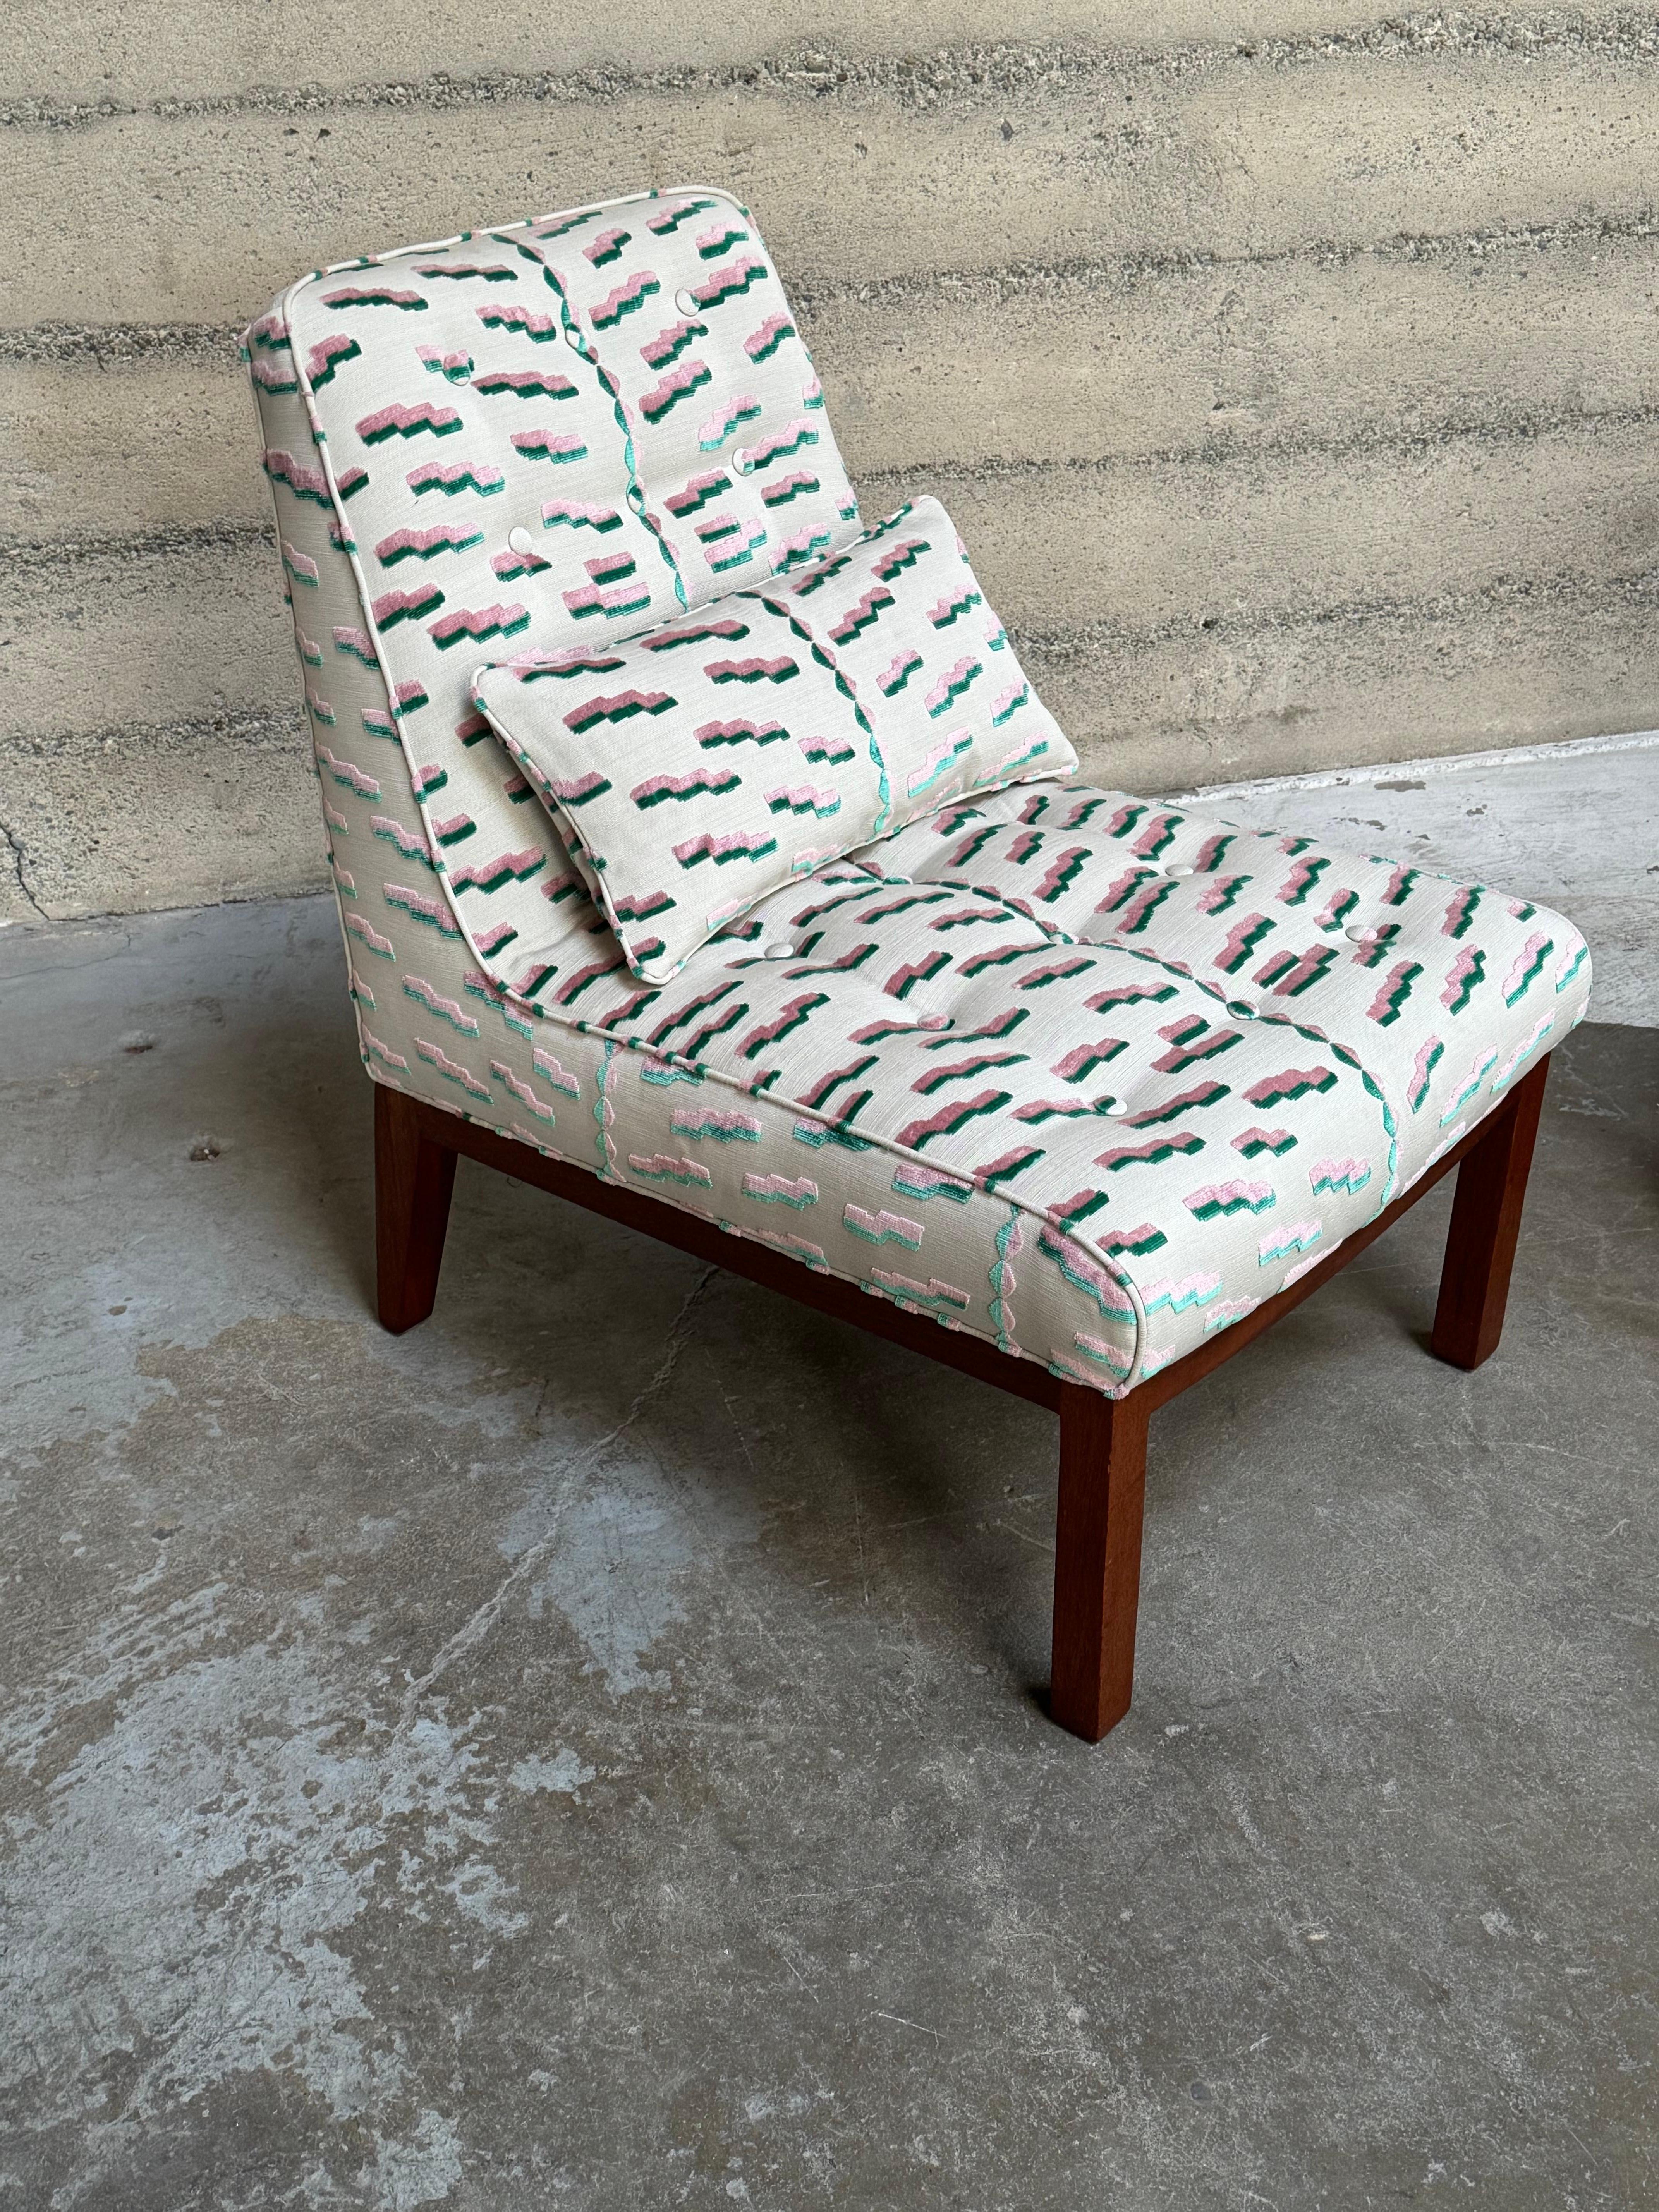 Classic slipper lounge chairs designed by Edward Wormley for Dunbar Furniture. These chairs are iconic pieces of mid-century modern design, and are updated with 